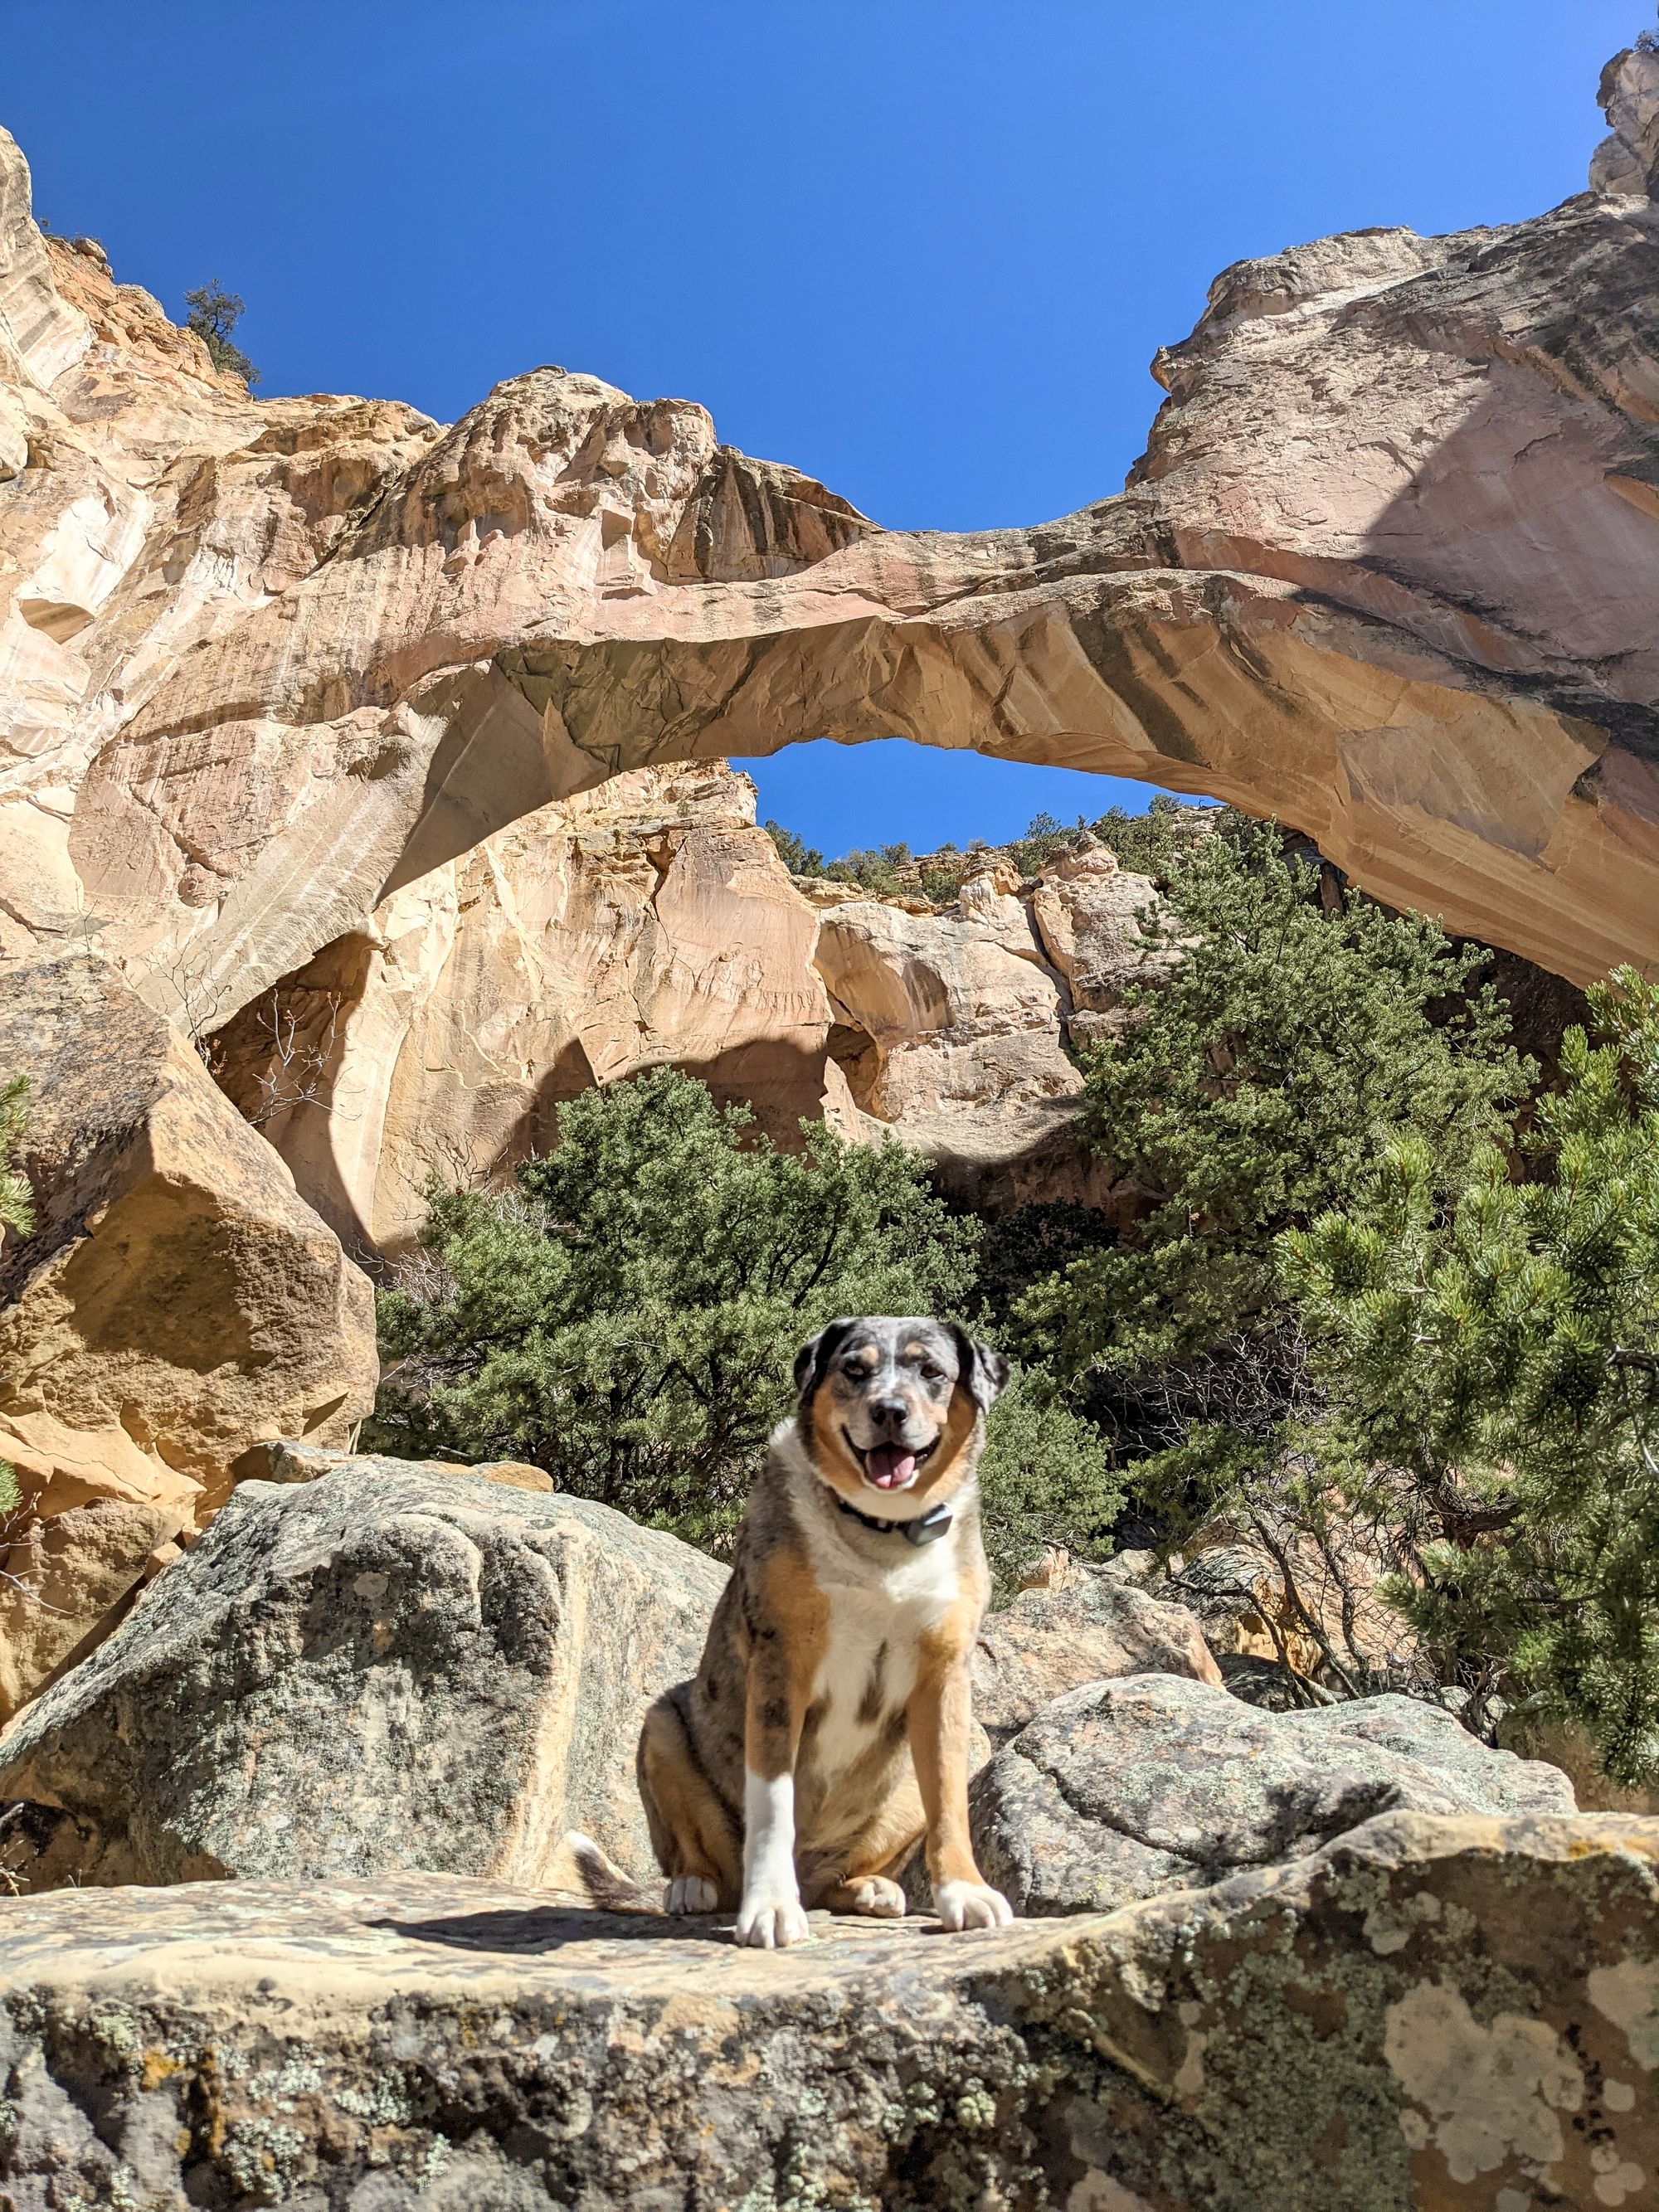 Visiting El Malpais National Monument with Dogs